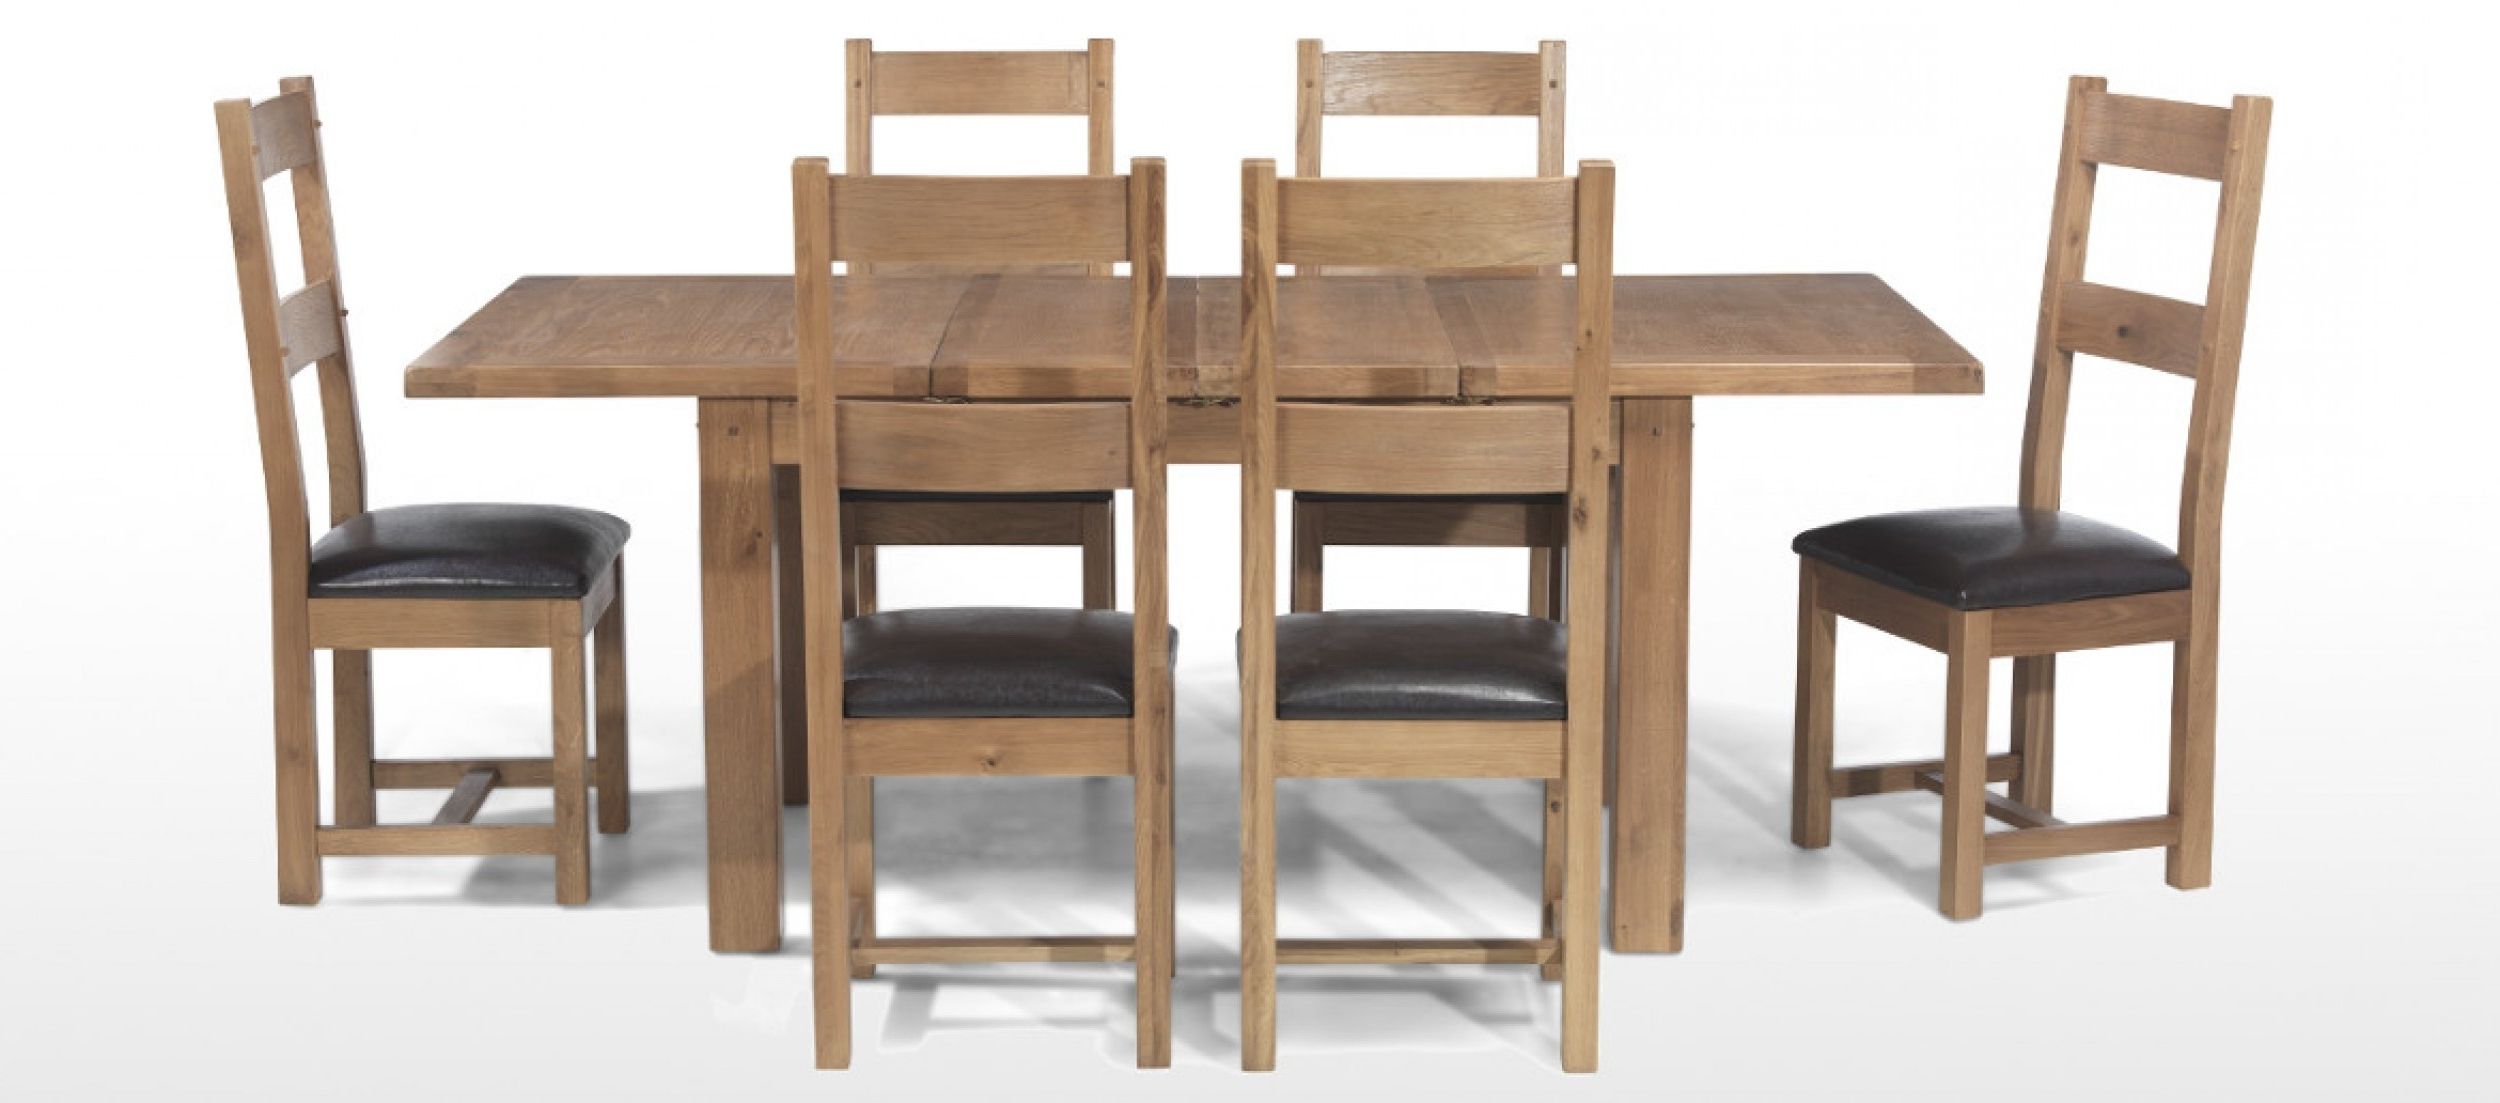 Rustic Oak 132 198 Cm Extending Dining Table And 6 Chairs (View 15 of 25)